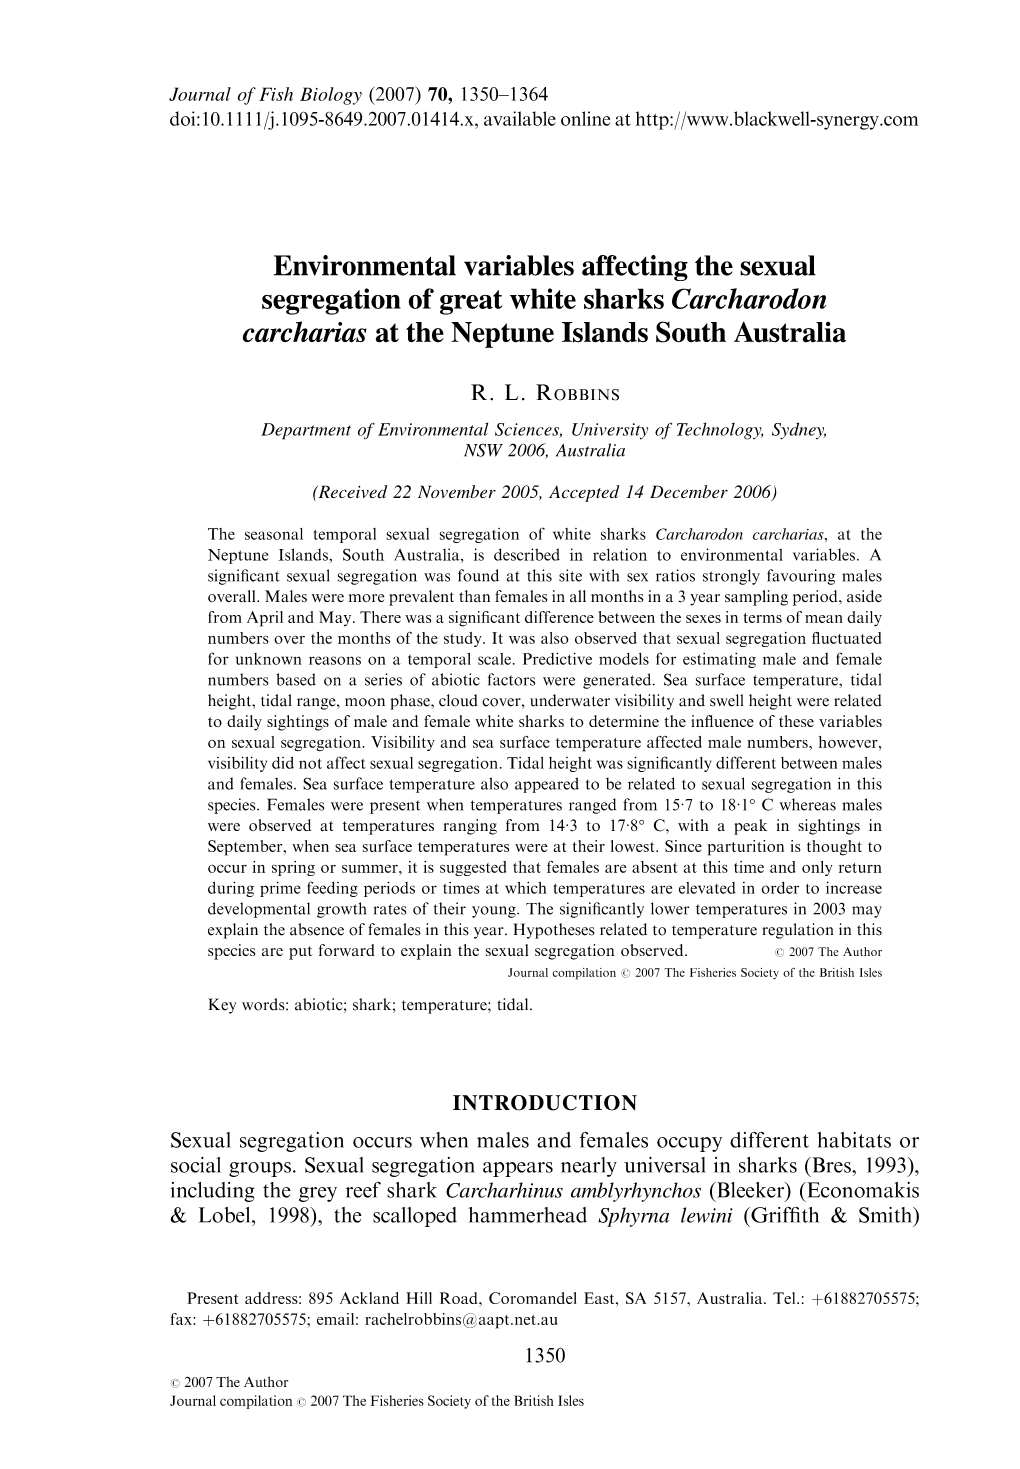 Environmental Variables Affecting the Sexual Segregation of Great White Sharks Carcharodon Carcharias at the Neptune Islands South Australia